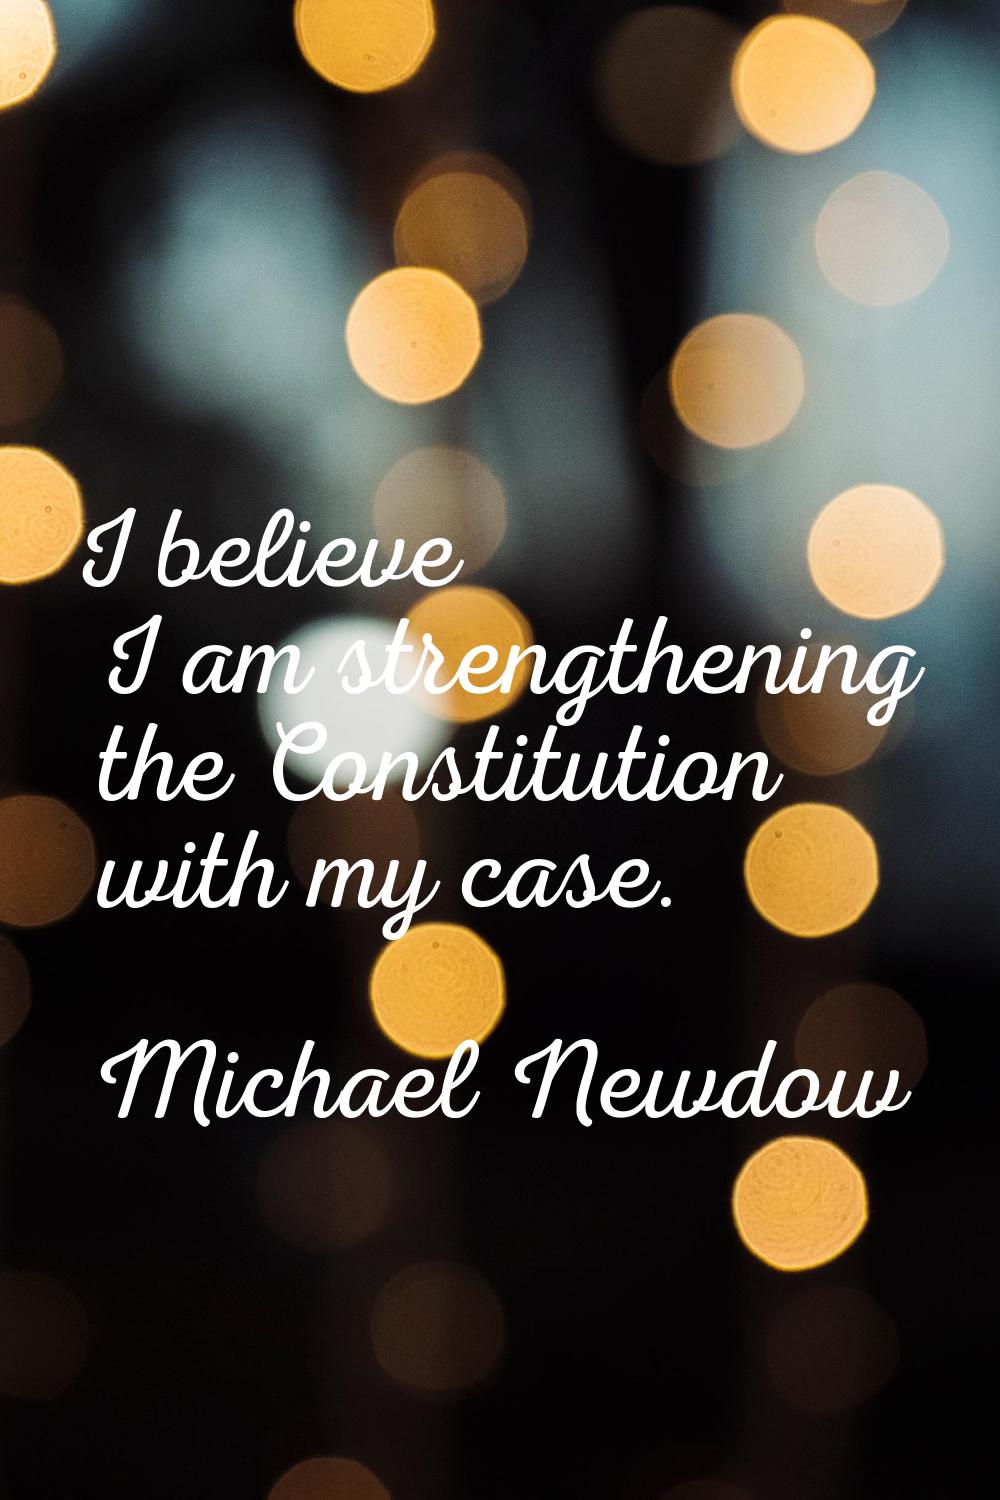 I believe I am strengthening the Constitution with my case.